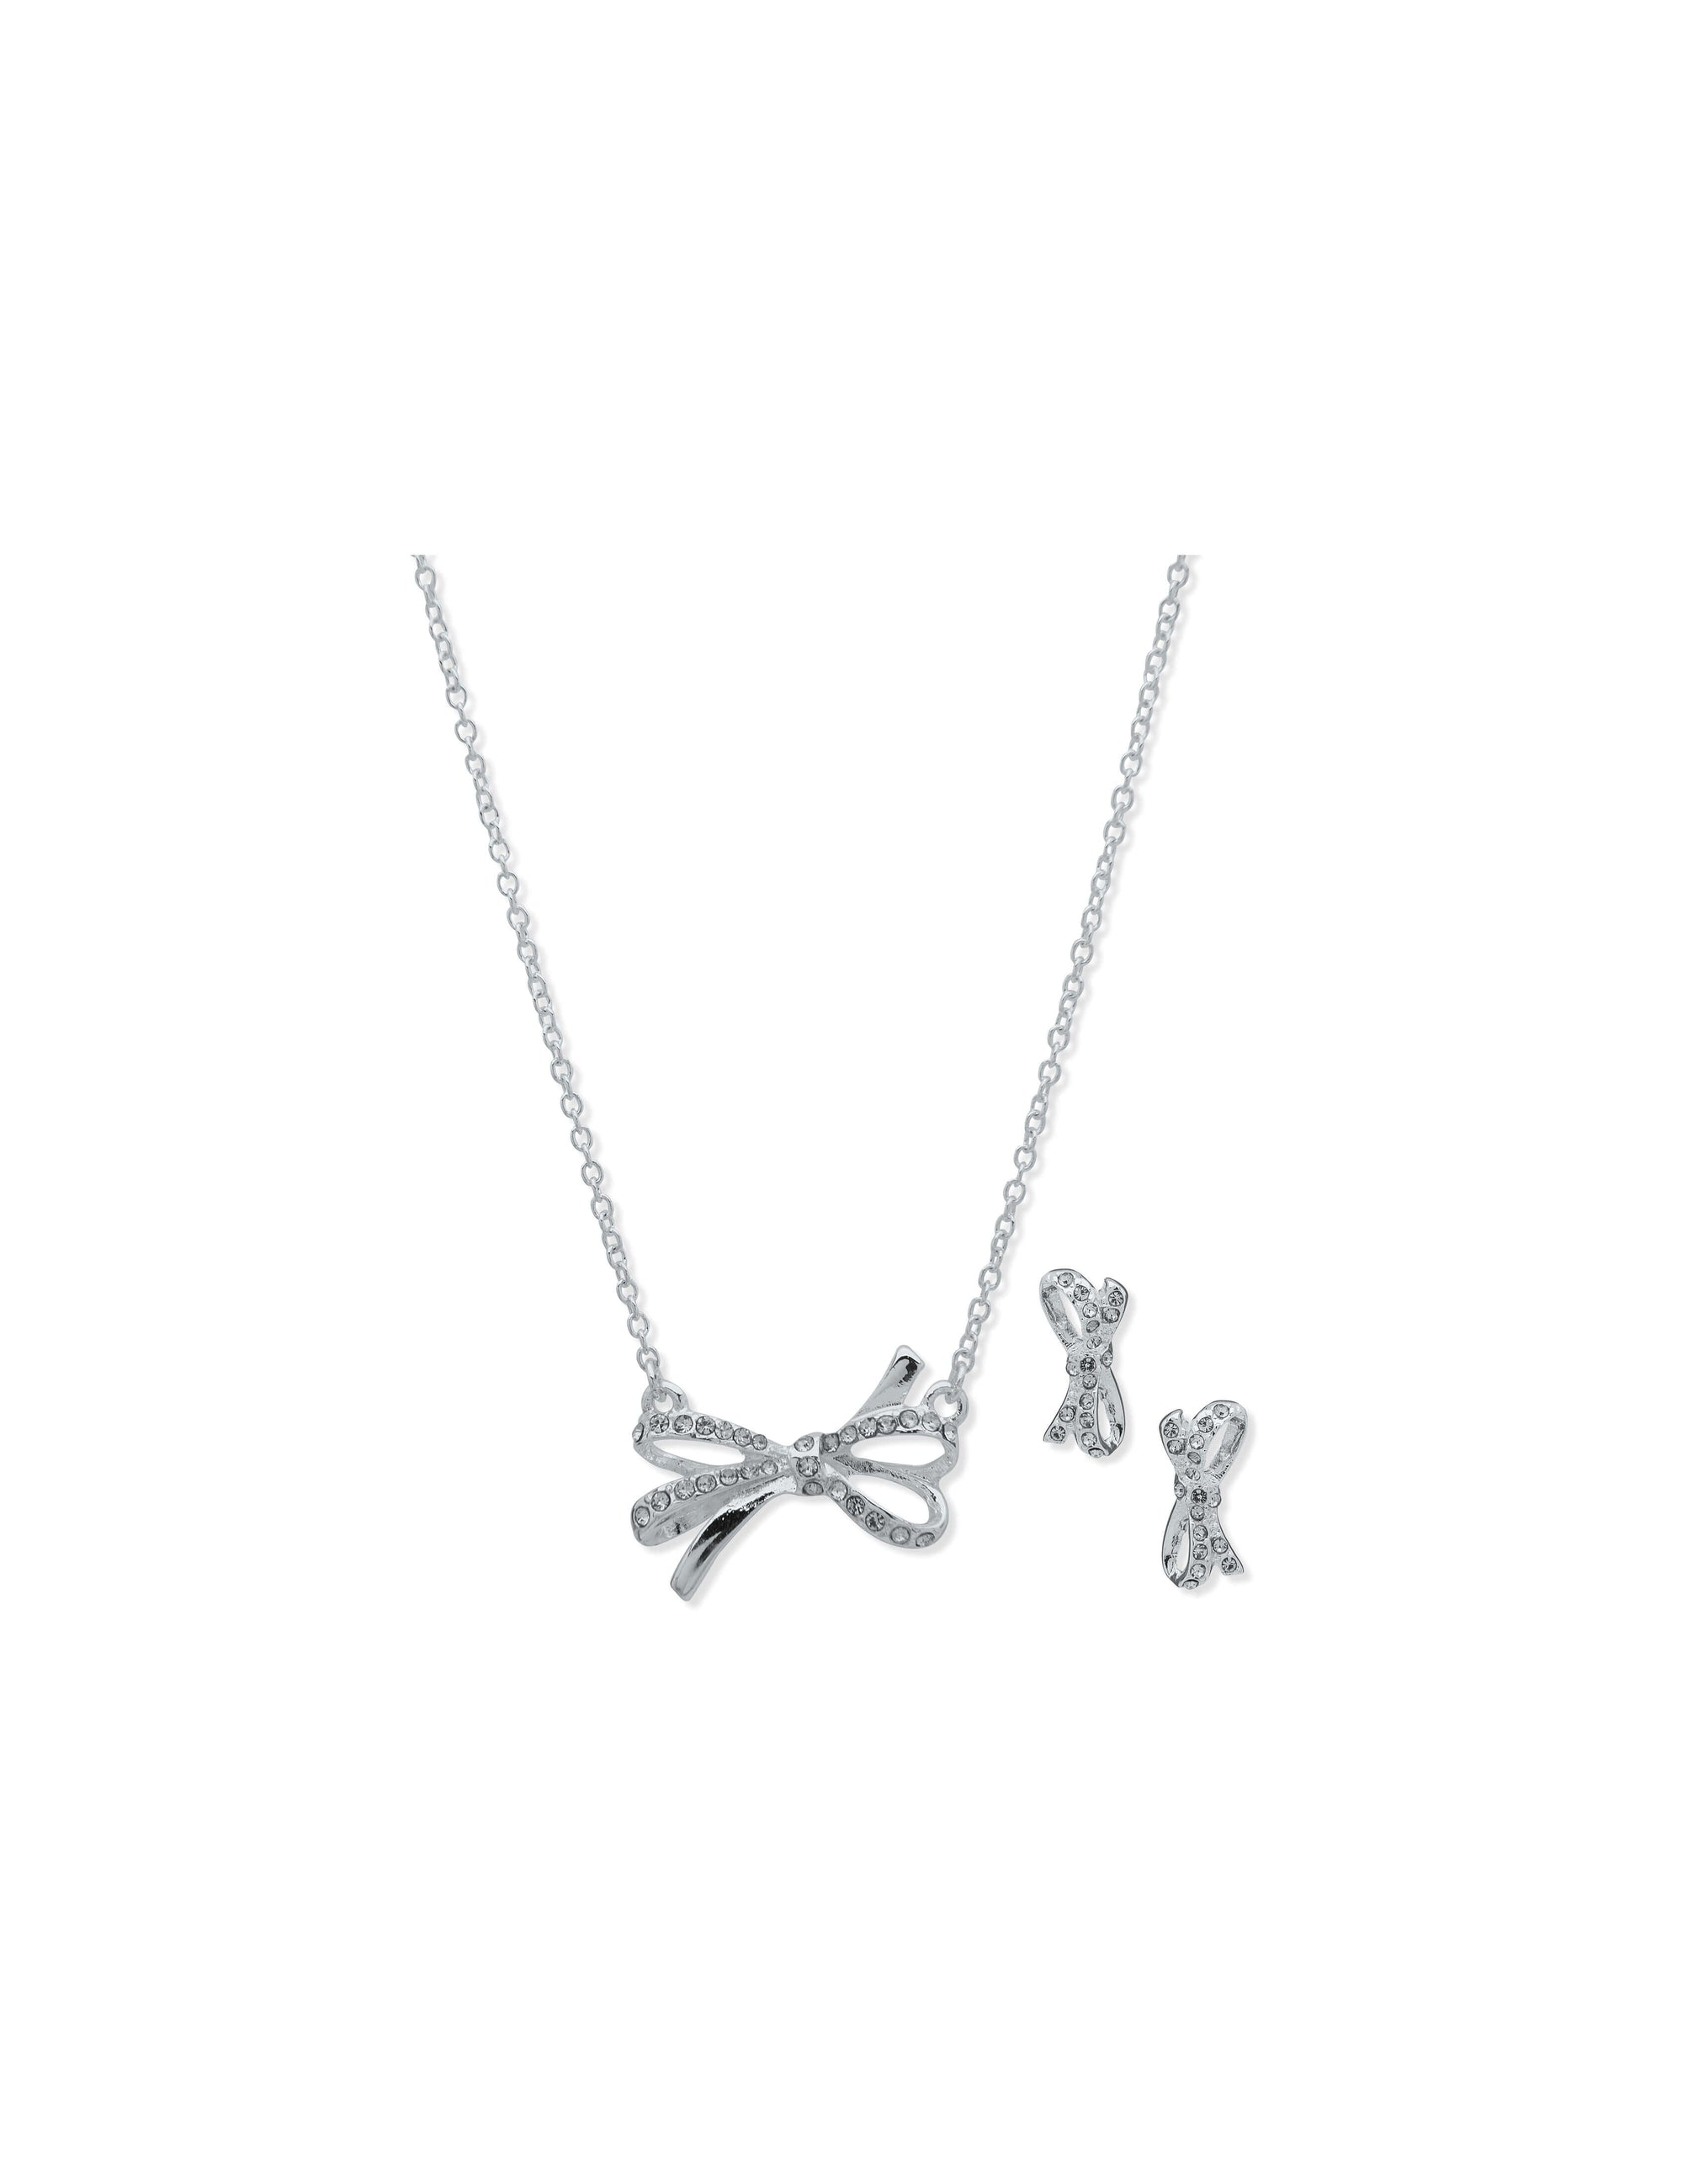 Tiny Alocasia Polly Necklace and Earring Set | Striped Cat Metalworks